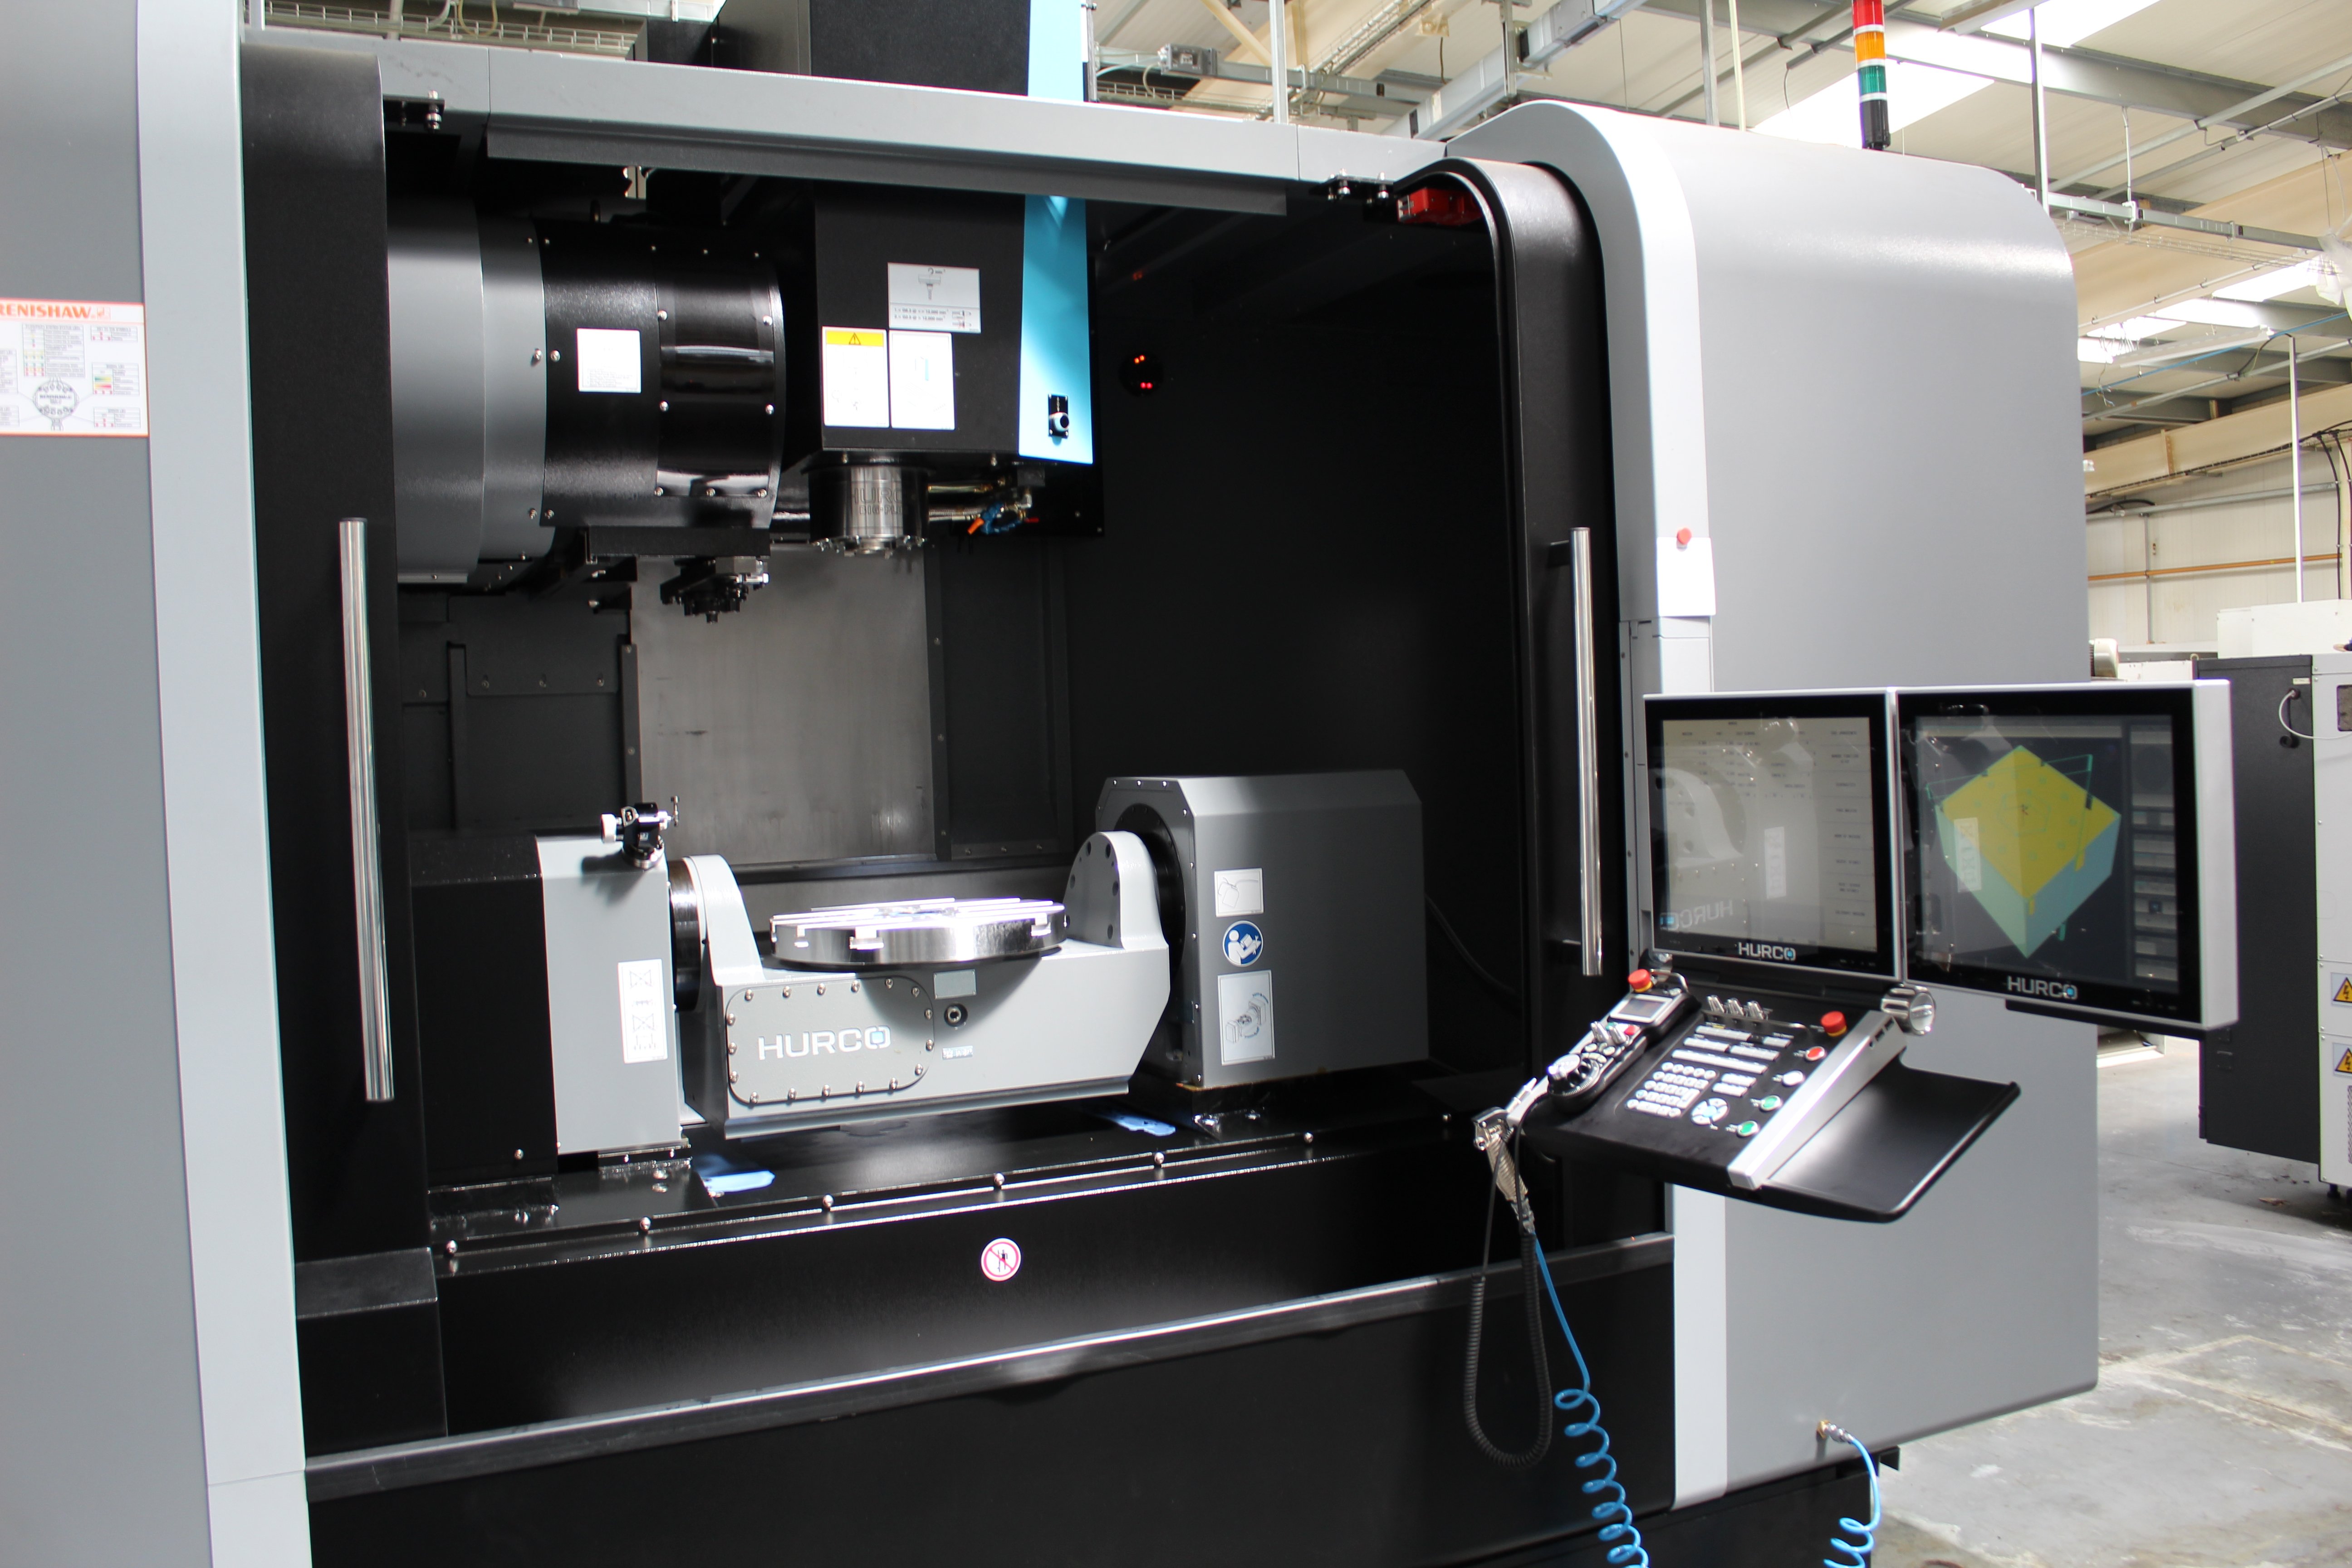 Hurco VMX60Ui boasts a maximum size of part up Ø500mm and a maximum table load of 400kg